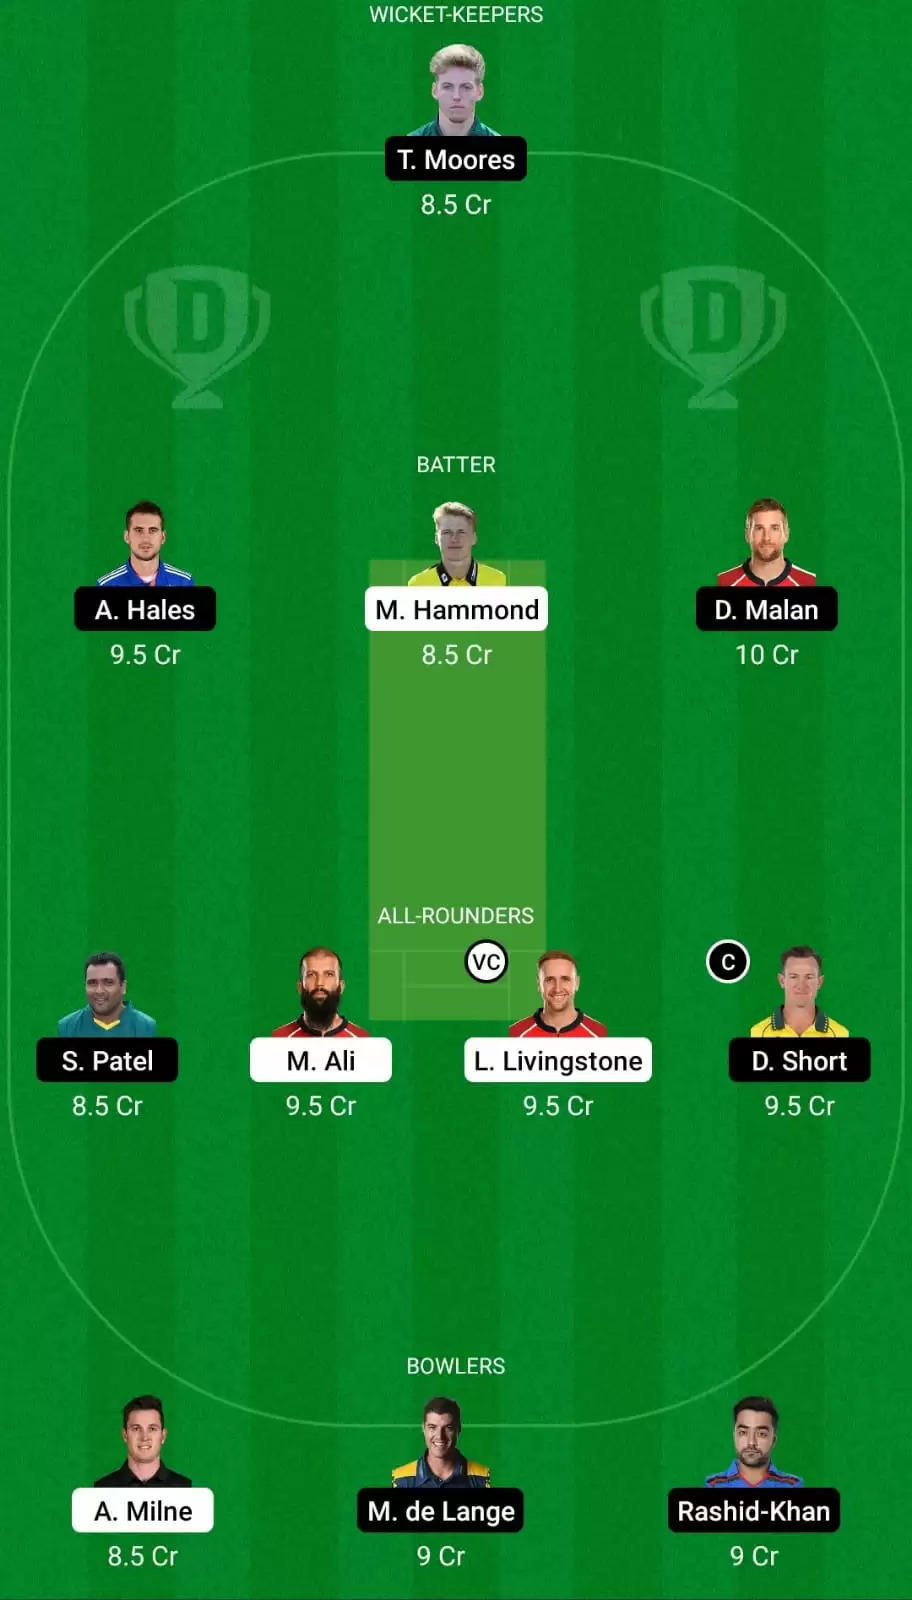 BPH vs TRT Dream11 Team Prediction for The Hundred Men’s 2021: Birmingham Phoenix vs Trent Rockets Best Fantasy Cricket Tips, Strongest Playing XI, Pitch Report and Player Updates